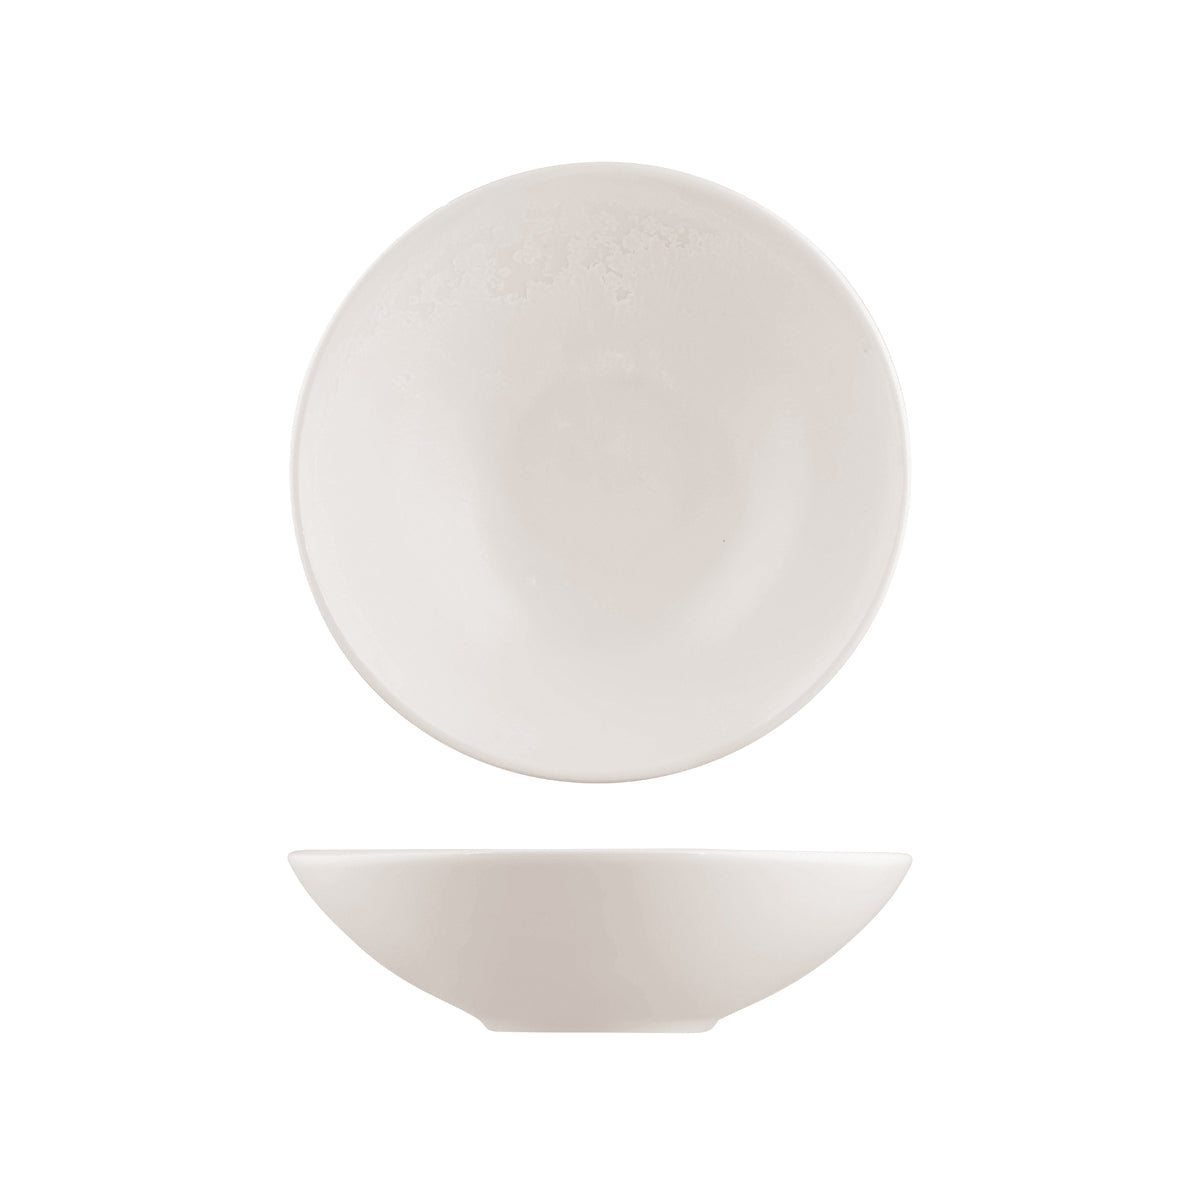 Round Bowl - 230mm, Snow, Moda Porcelain from Moda Porcelain. made out of Porcelain and sold in boxes of 3. Hospitality quality at wholesale price with The Flying Fork! 